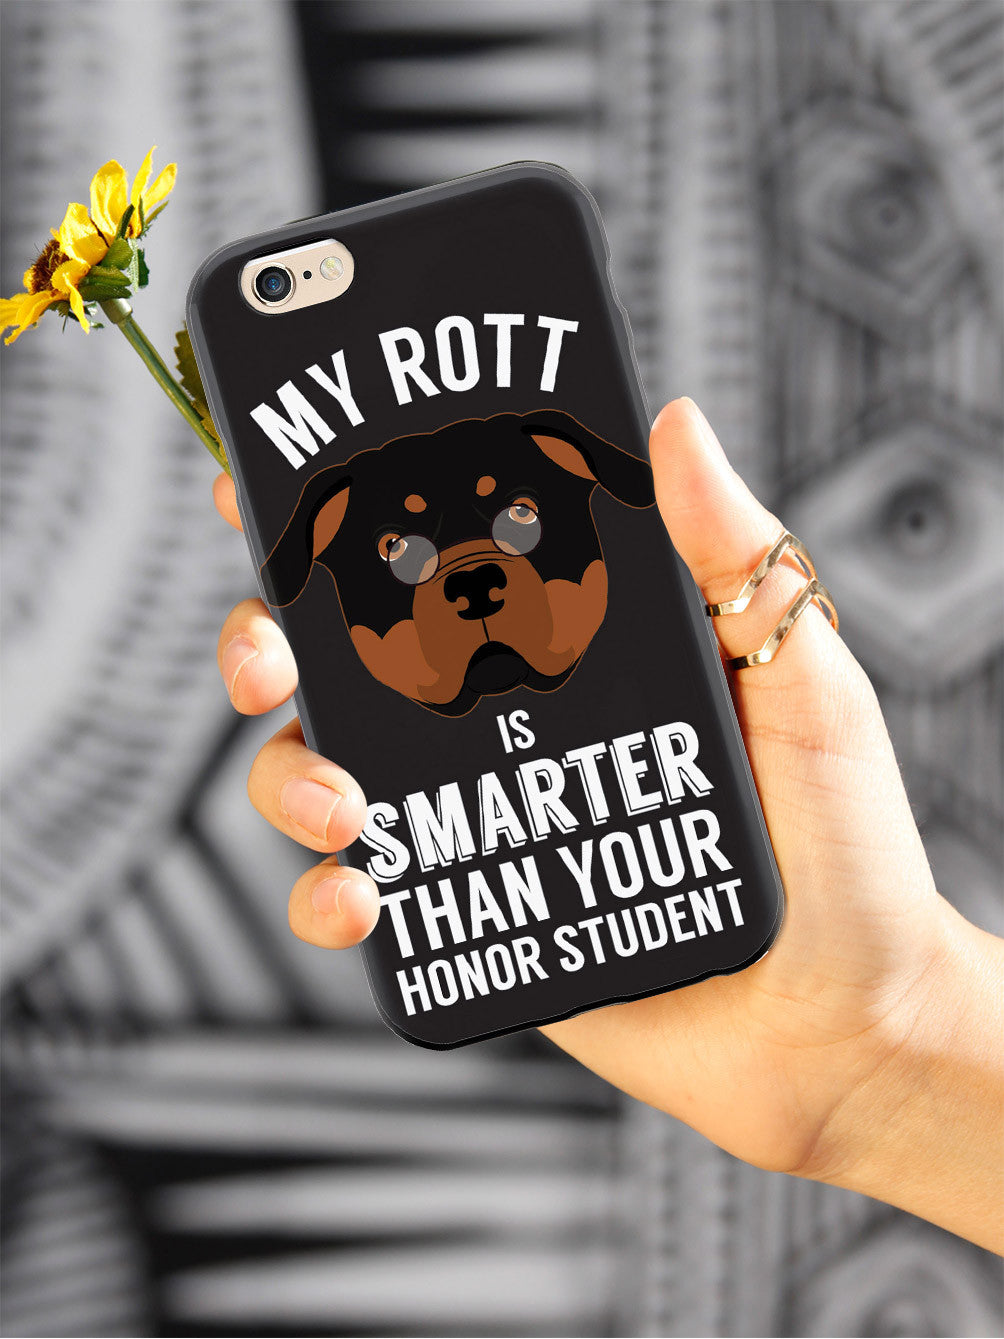 Smarter Than Your Honor Student - Rott Case